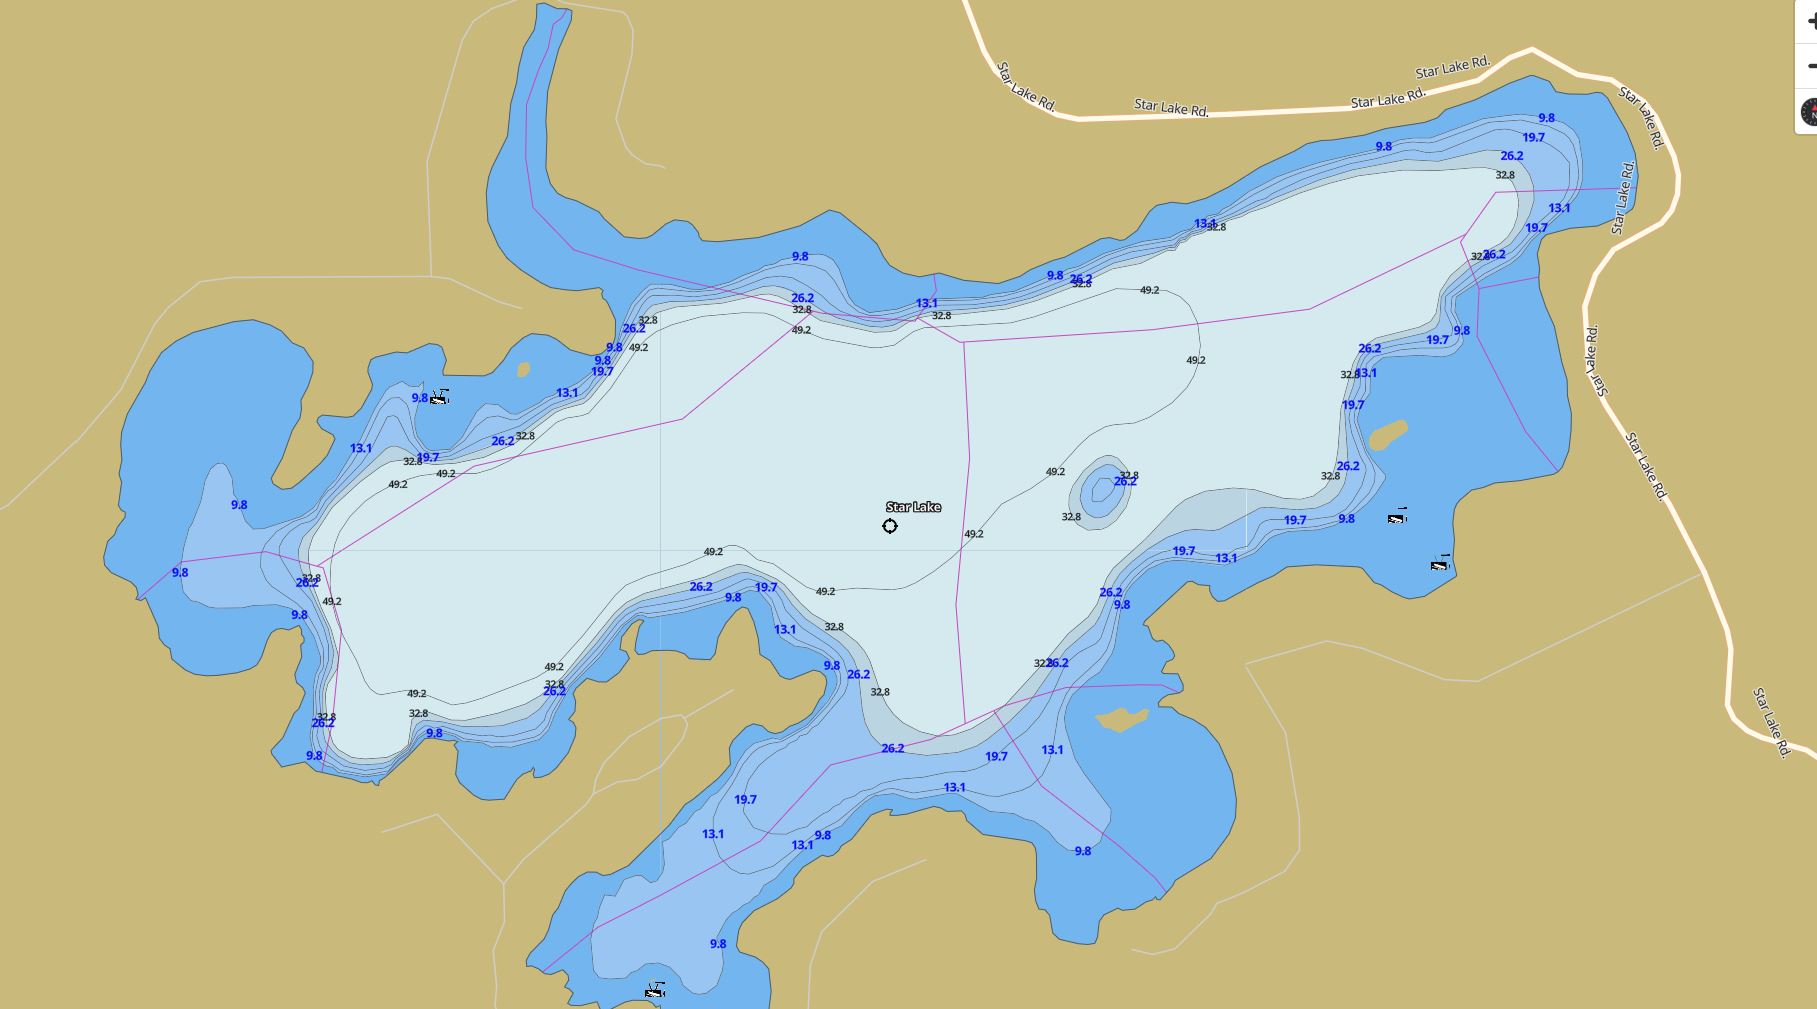 Contour Map of Star Lake in Municipality of Seguin and the District of Parry Sound